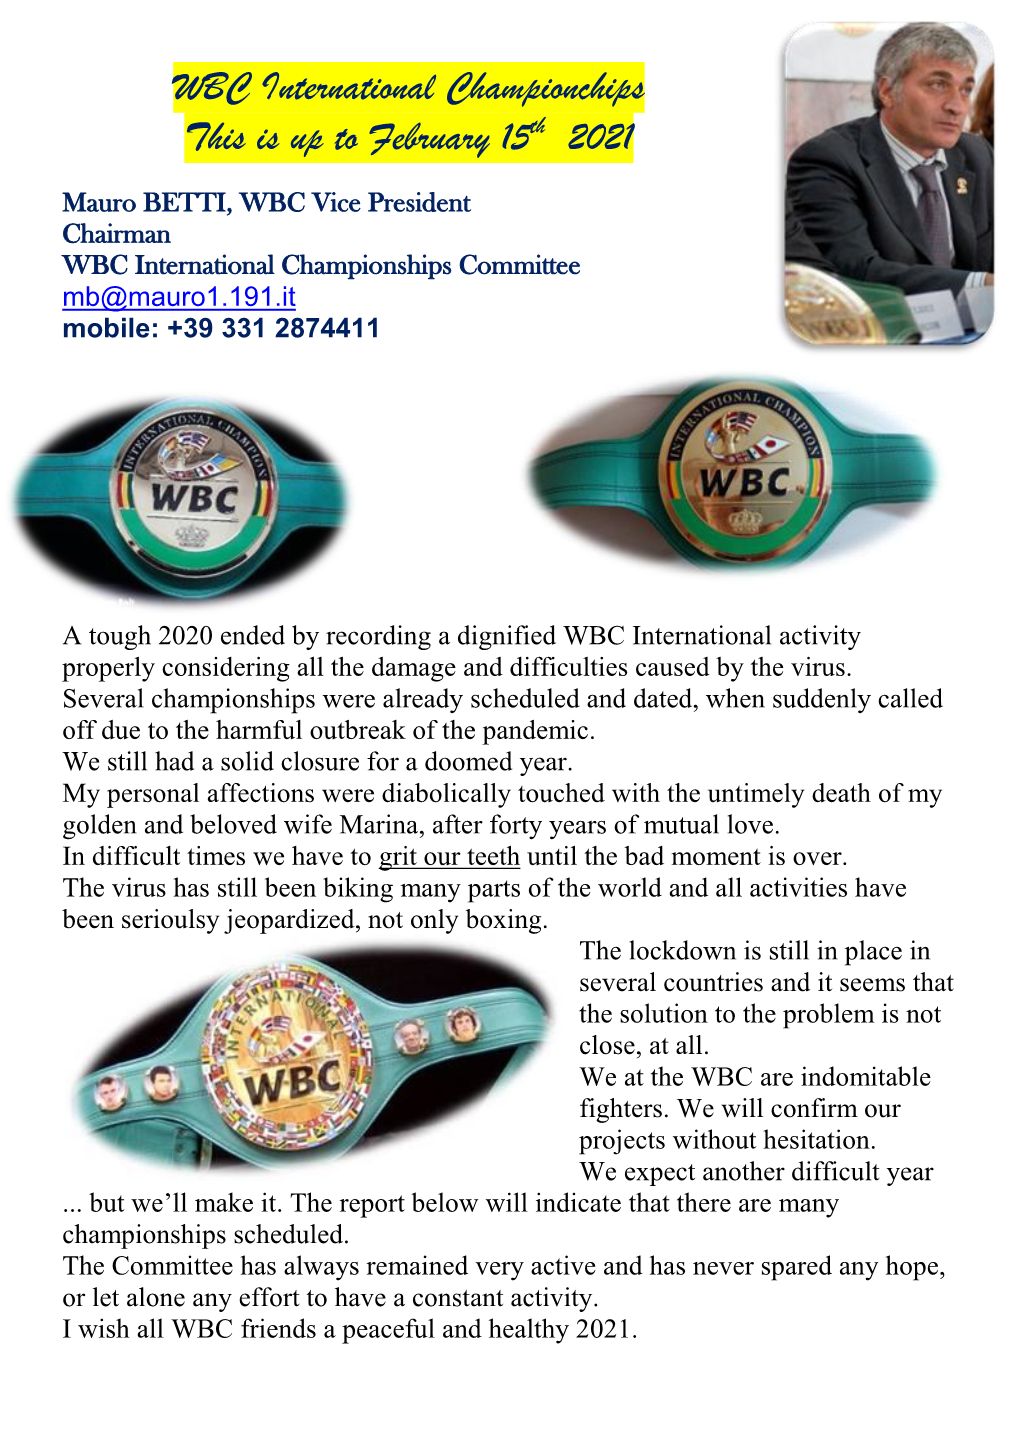 WBC International Championchips This Is up to February 15Th 2021